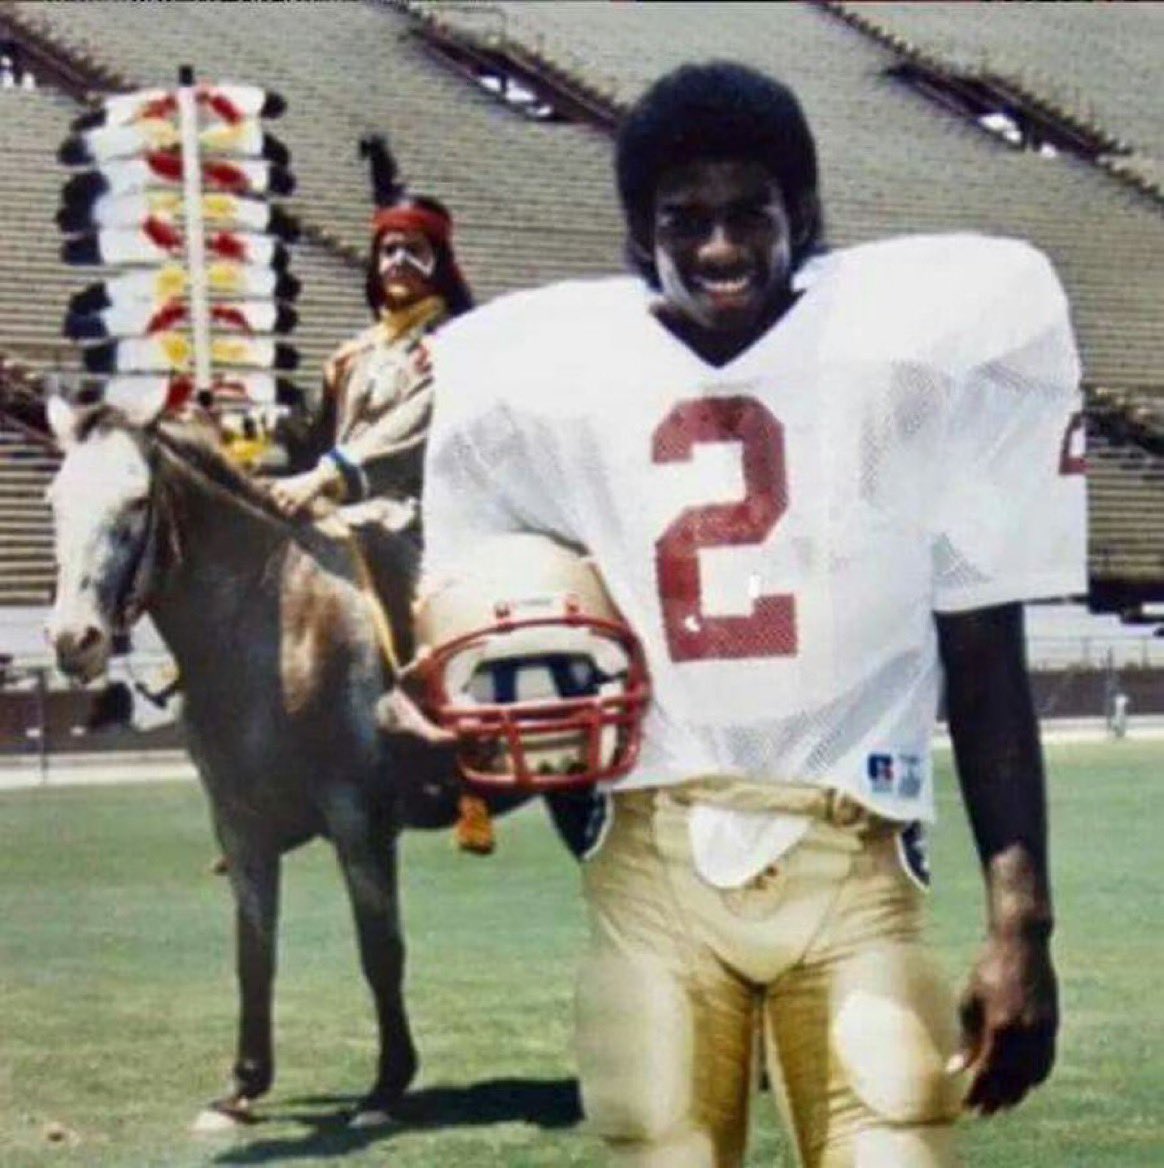 I would absolutely watch a show where Deion and the guy on the horse just travel around America together solving crimes and shit.